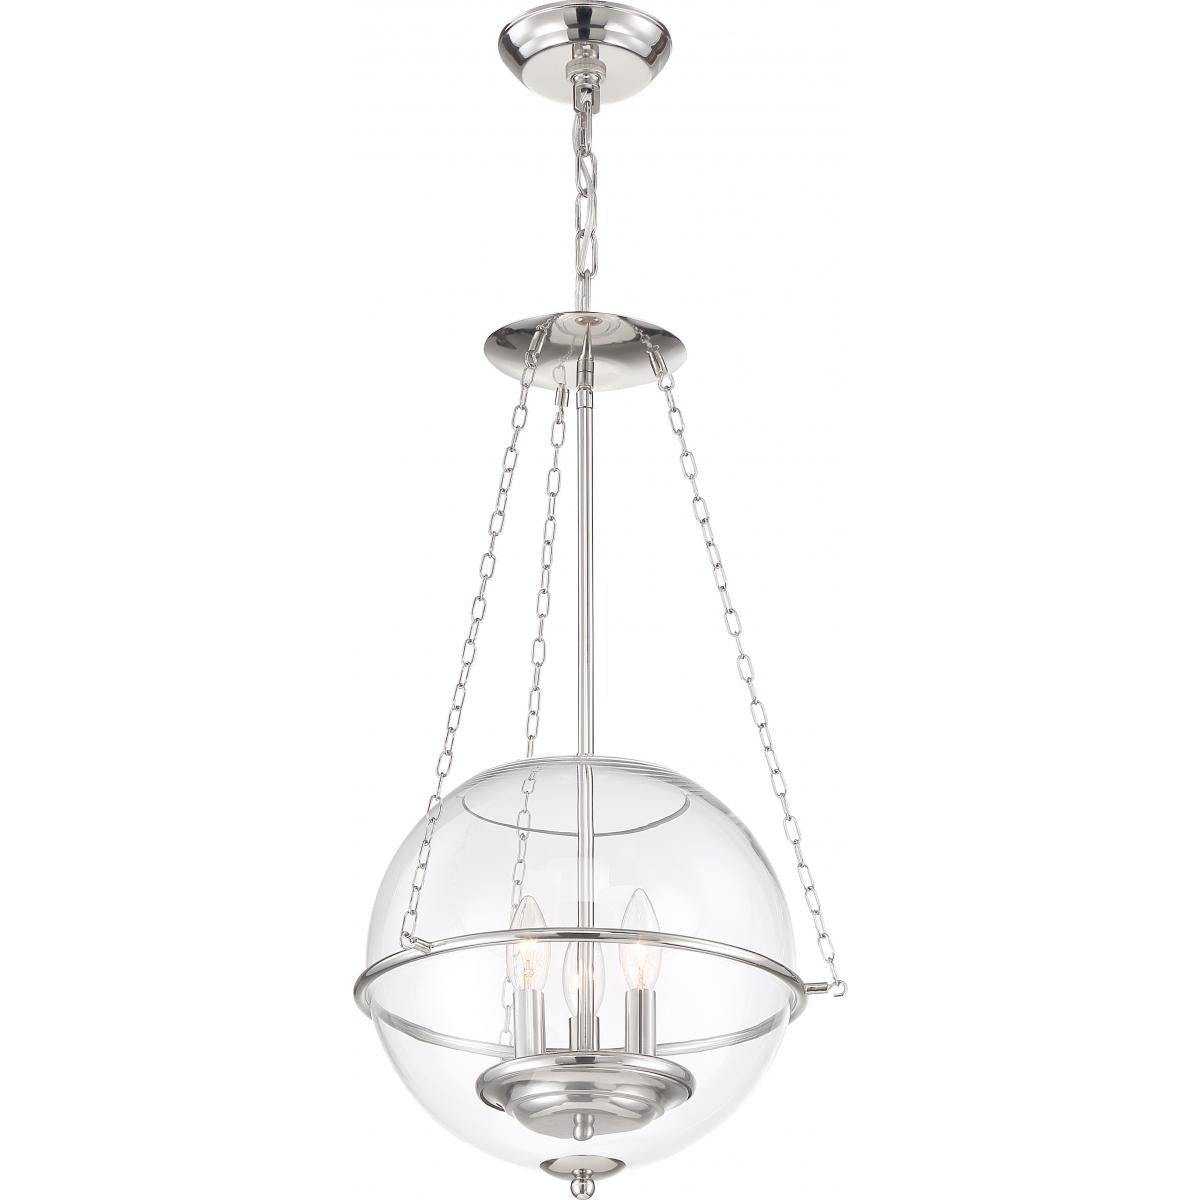 Odyssey - 3 Light Pendant - with Clear Glass - Polished Nickel Finish